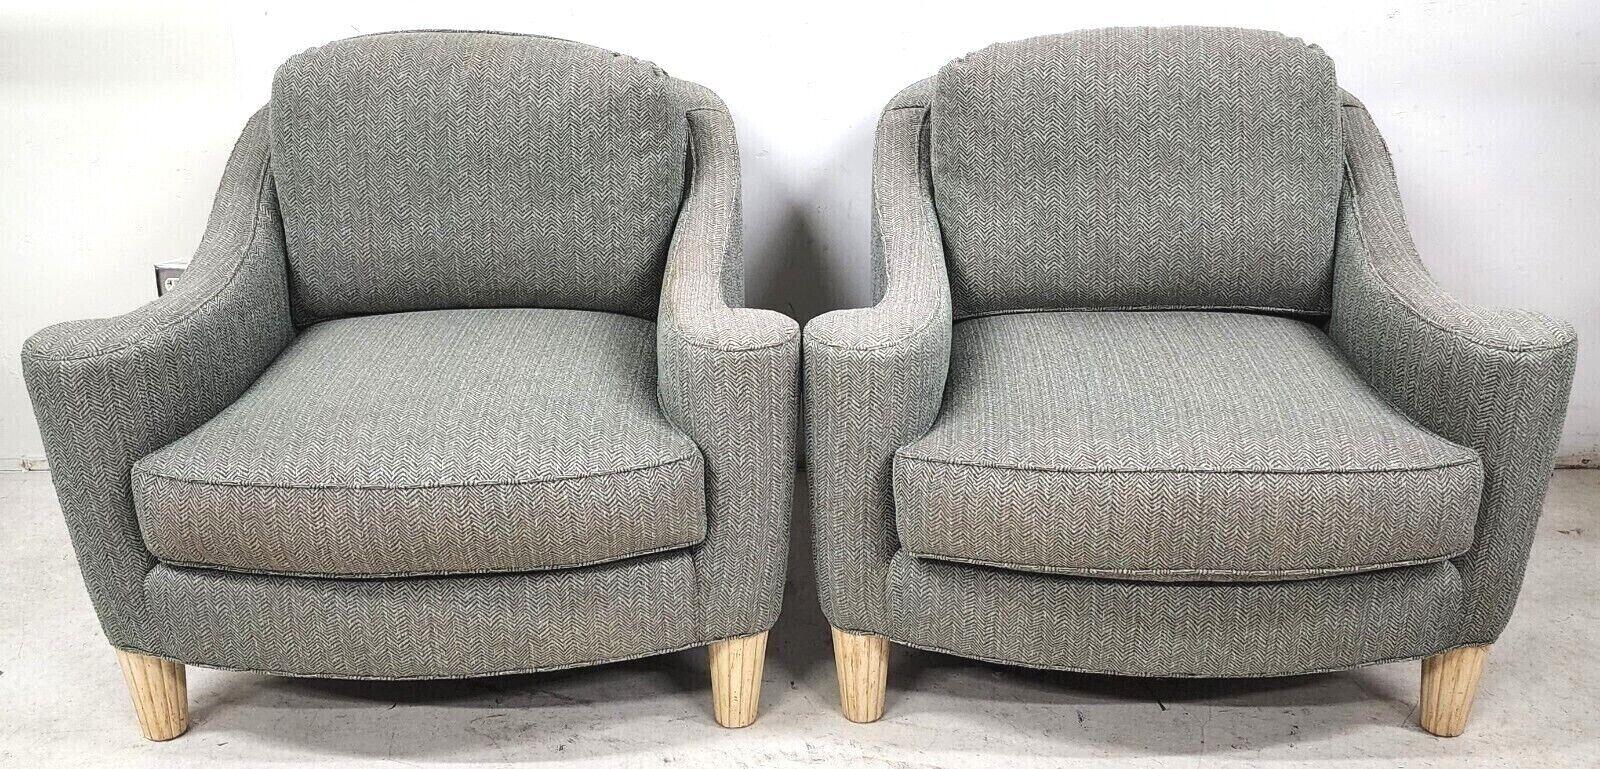 For FULL item description be sure to click on CONTINUE READING at the bottom of this listing.

Offering one of our recent palm beach estate fine furniture acquisitions of a
pair of modern contemporary club chairs by PEARSON

Very comfortable